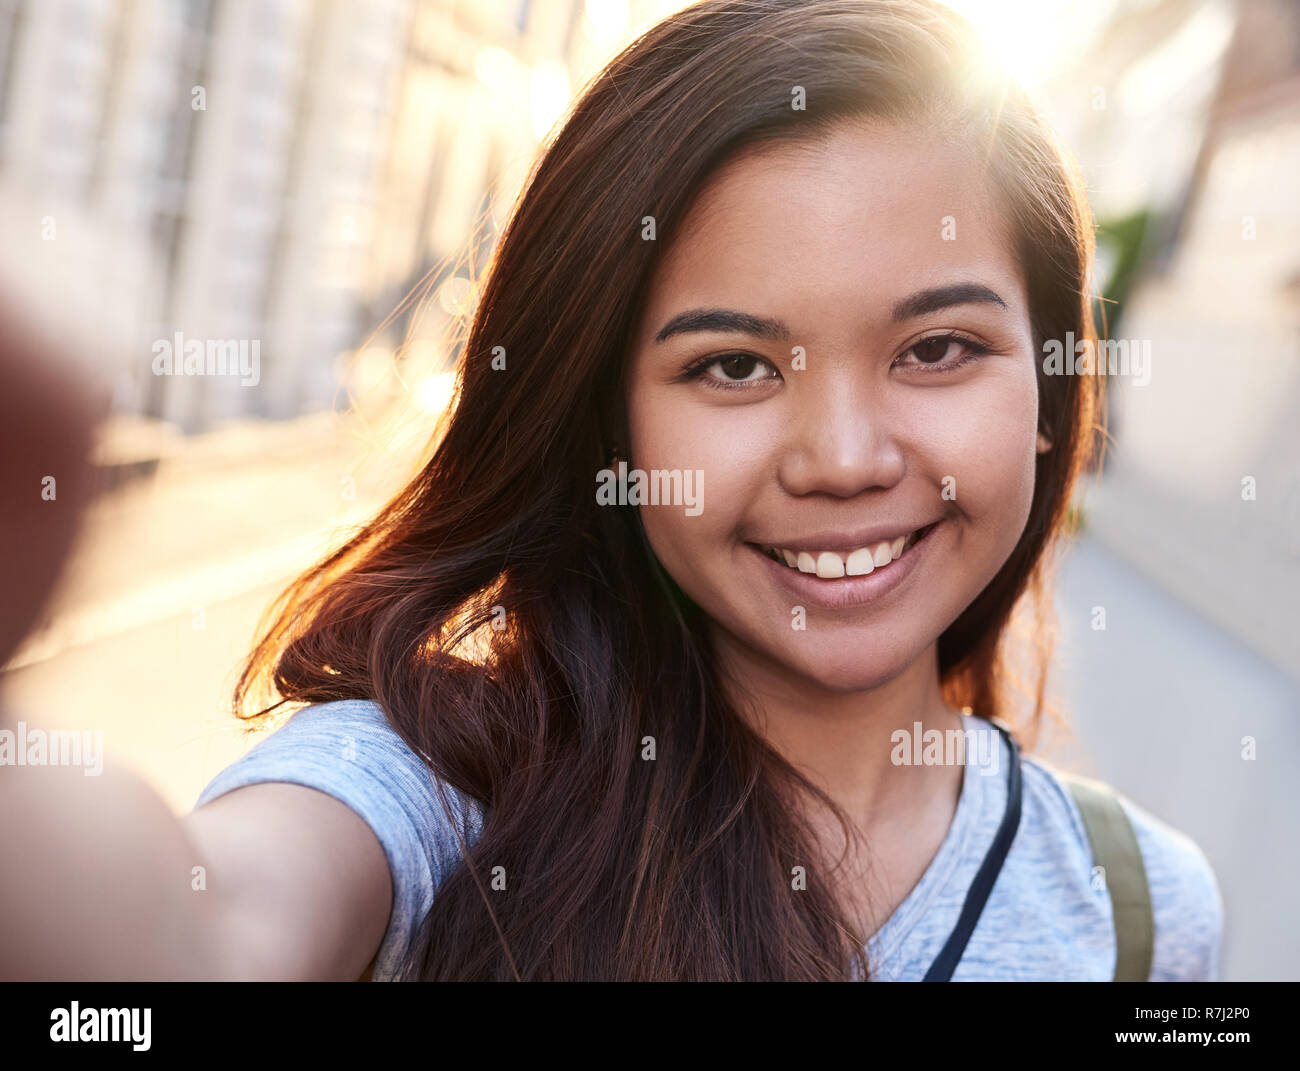 Content young Asian woman walking in the city taking selfies Stock Photo